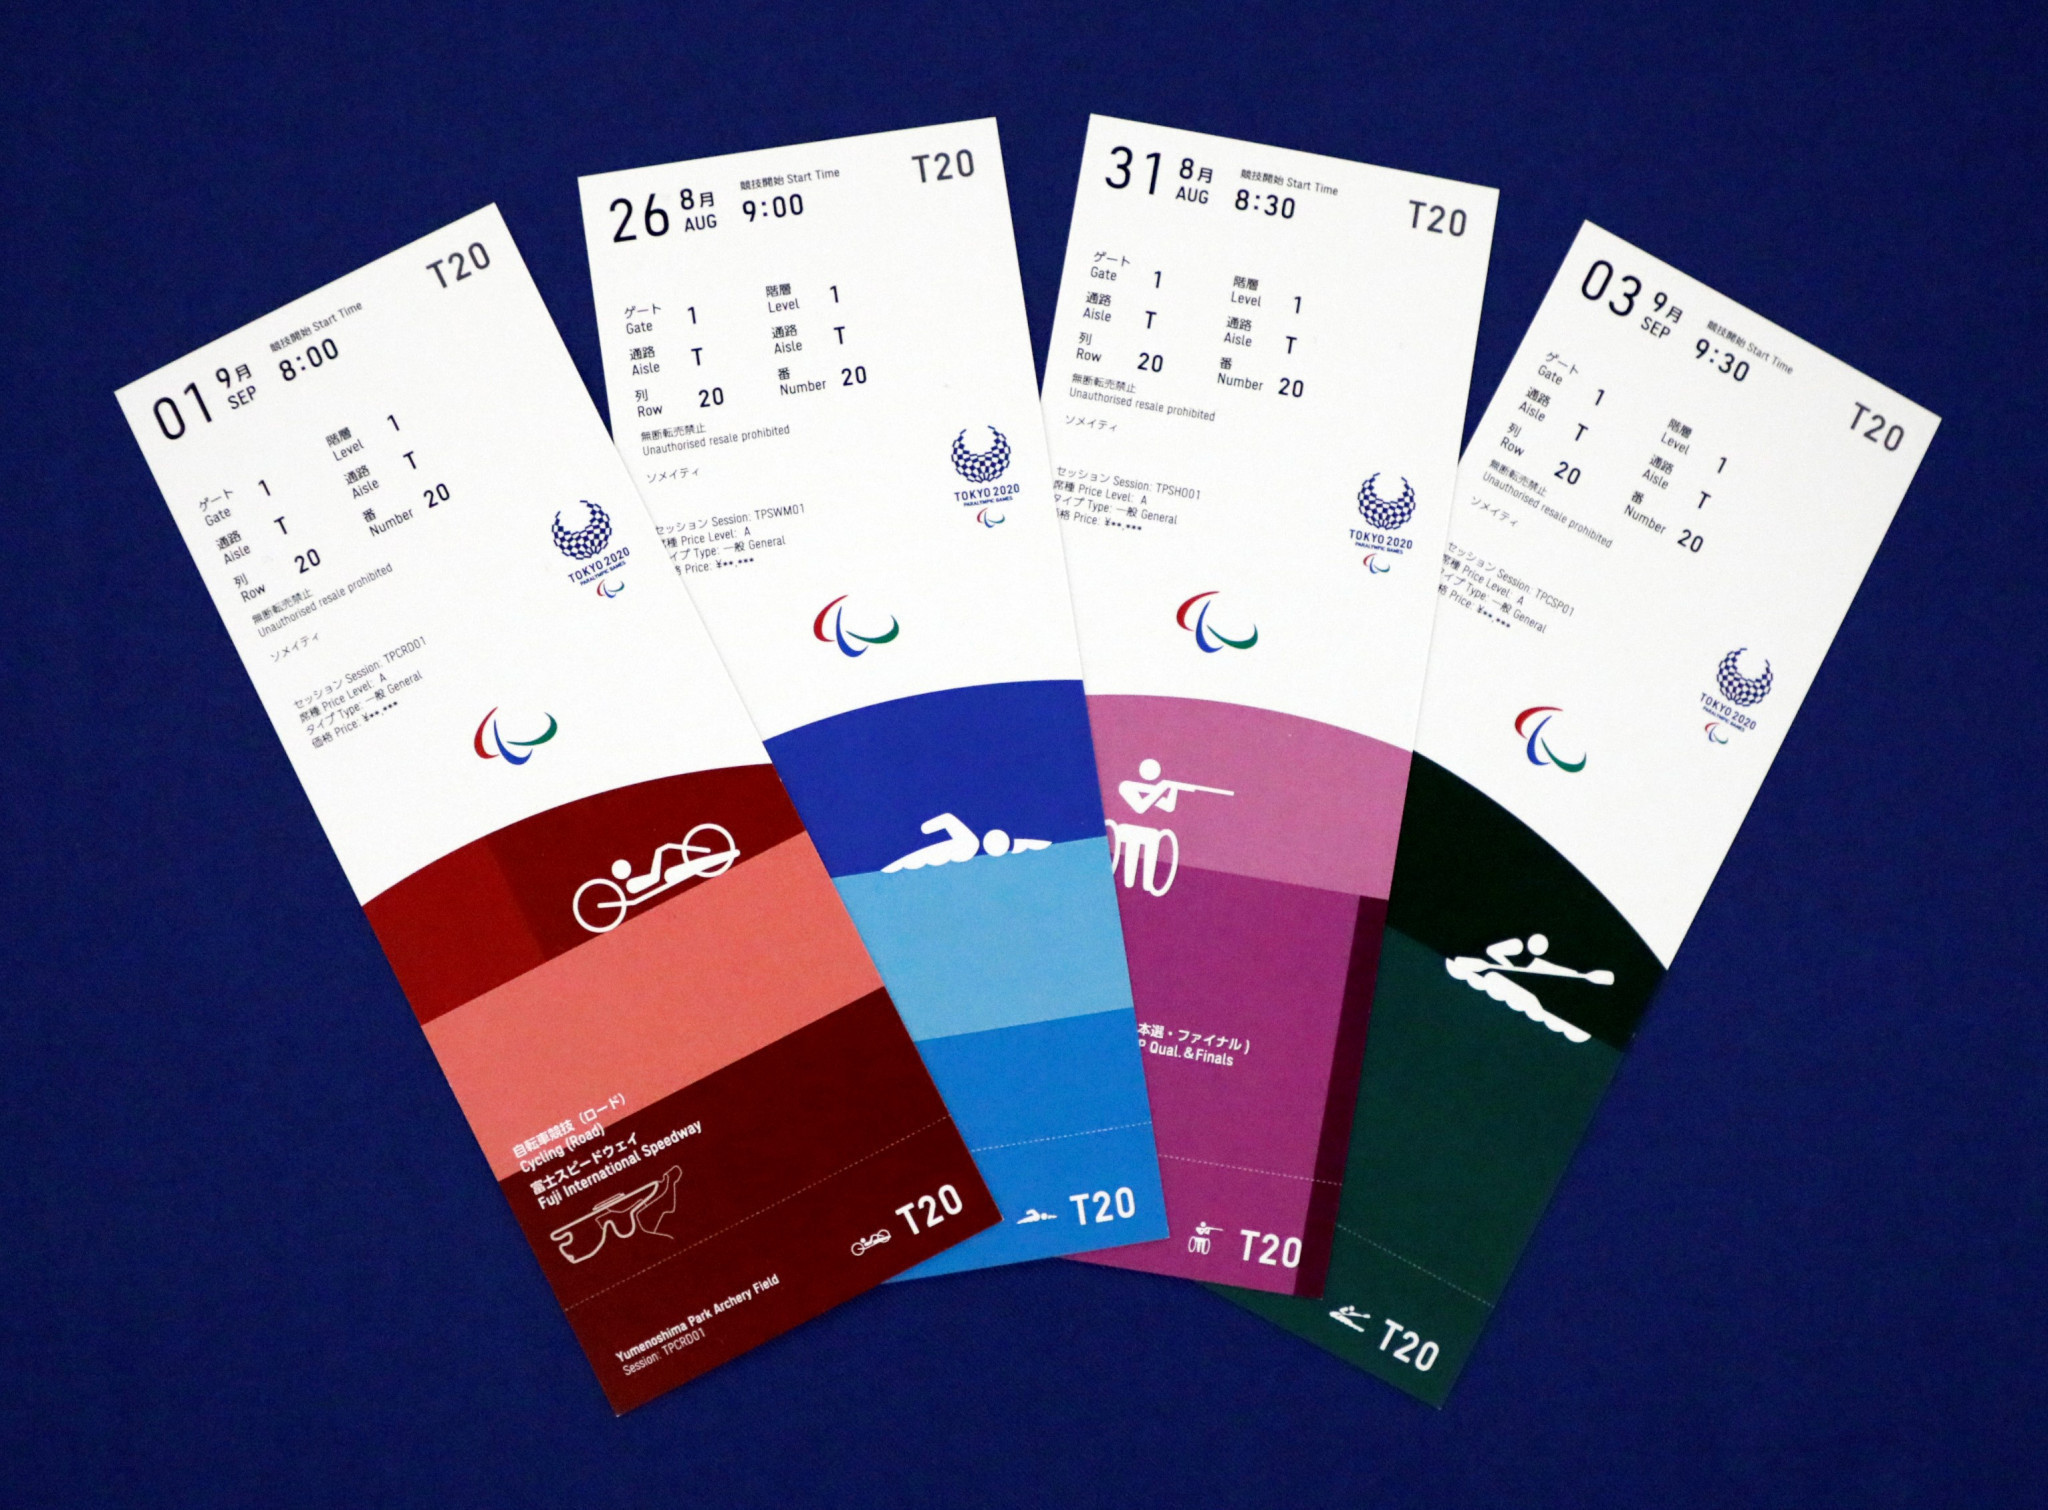 Second Tokyo 2020 Paralympics ticket lottery closes in Japan